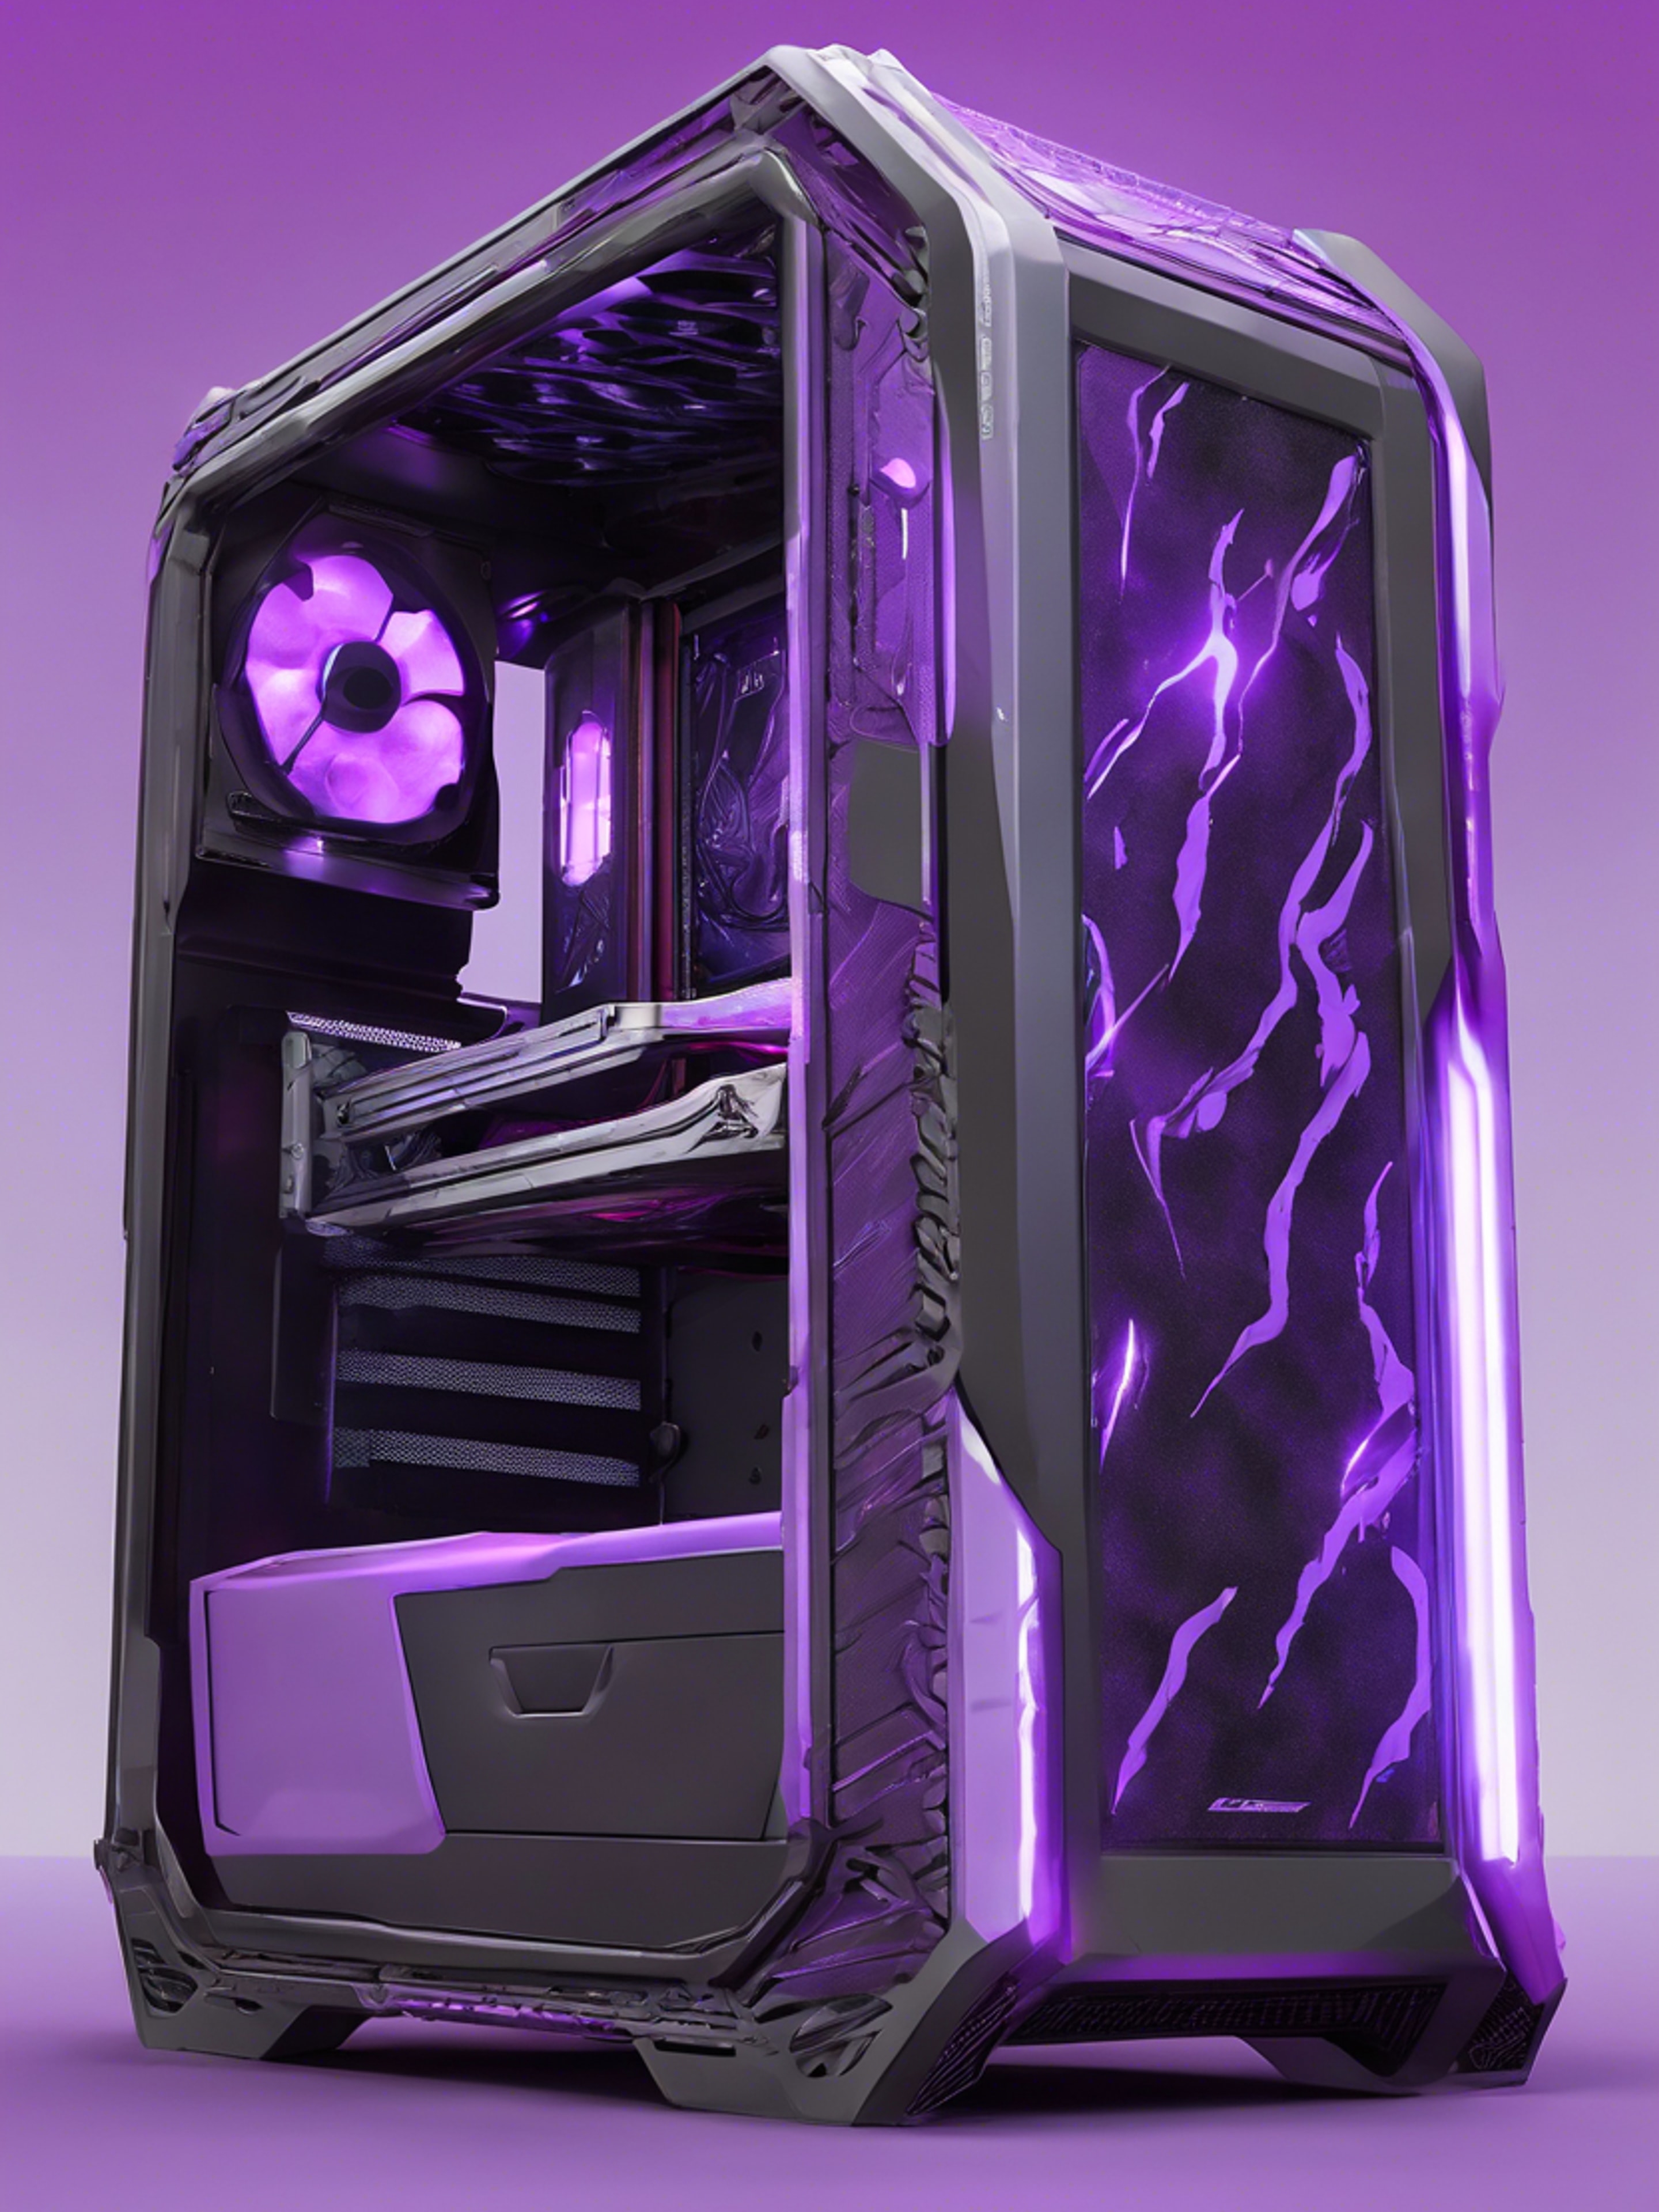 A side view of a thunderous gaming rig covered in custom neon purple detailing under cool lighting. Tapeta[cca71b66ee6840febbf4]